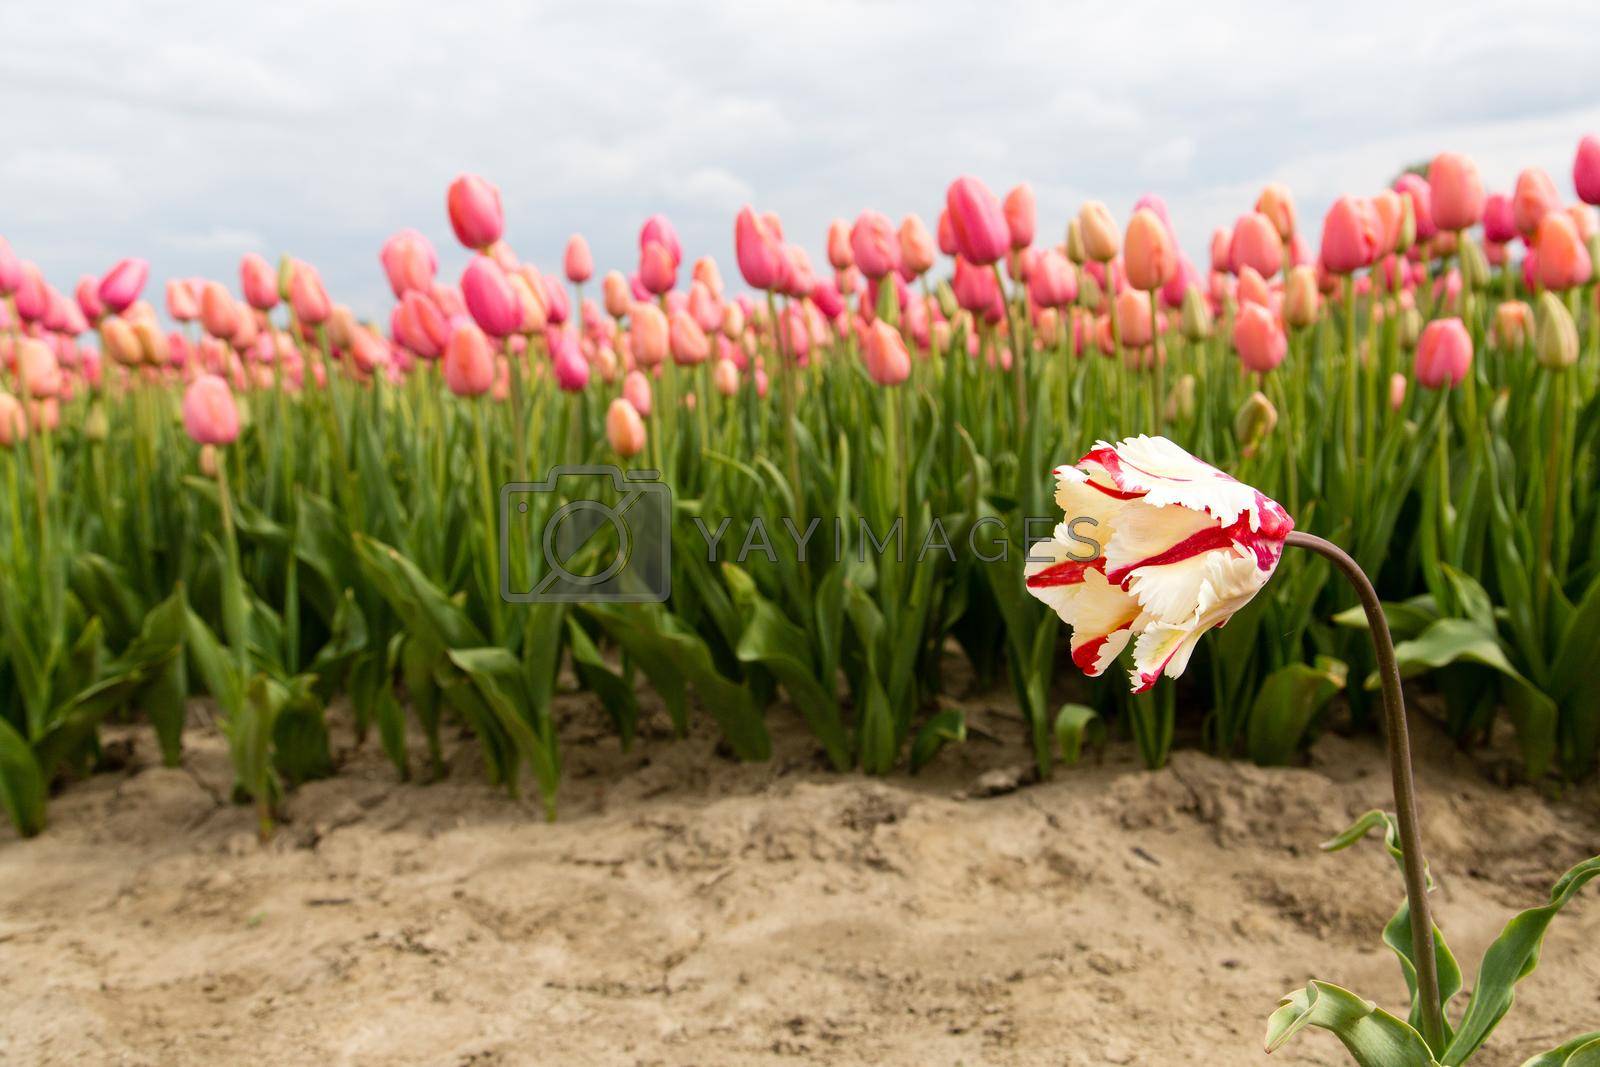 Royalty free image of Field of tulips by Kartouchken